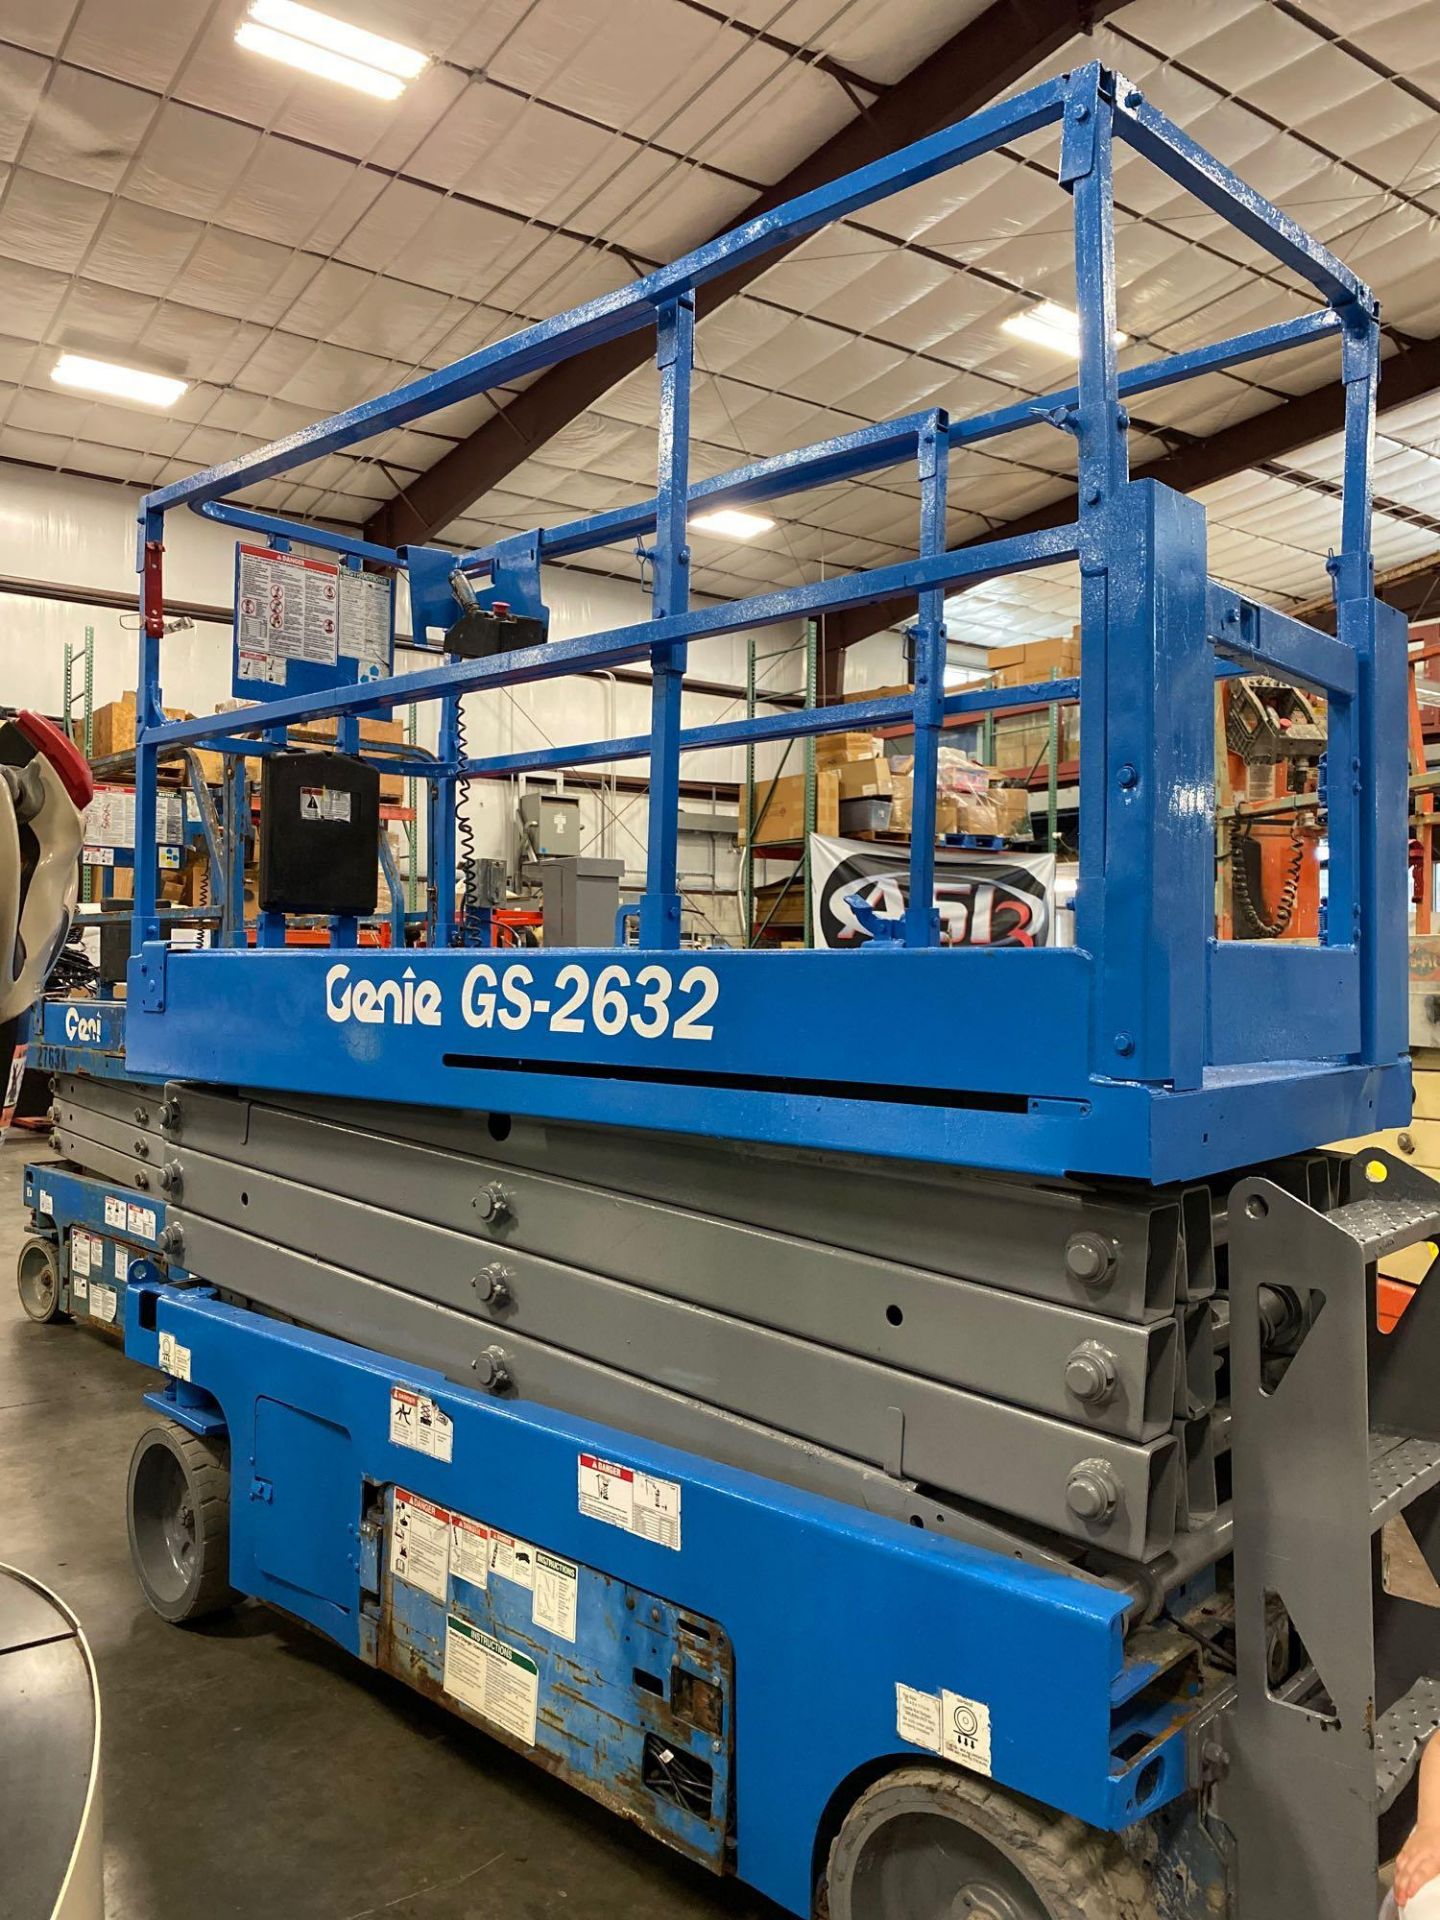 GENIE GS 2632 ELECTRIC SCISSOR LIFT, 26' PLATFORM HEIGHT, BUILT IN BATTERY CHARGER - Image 11 of 12